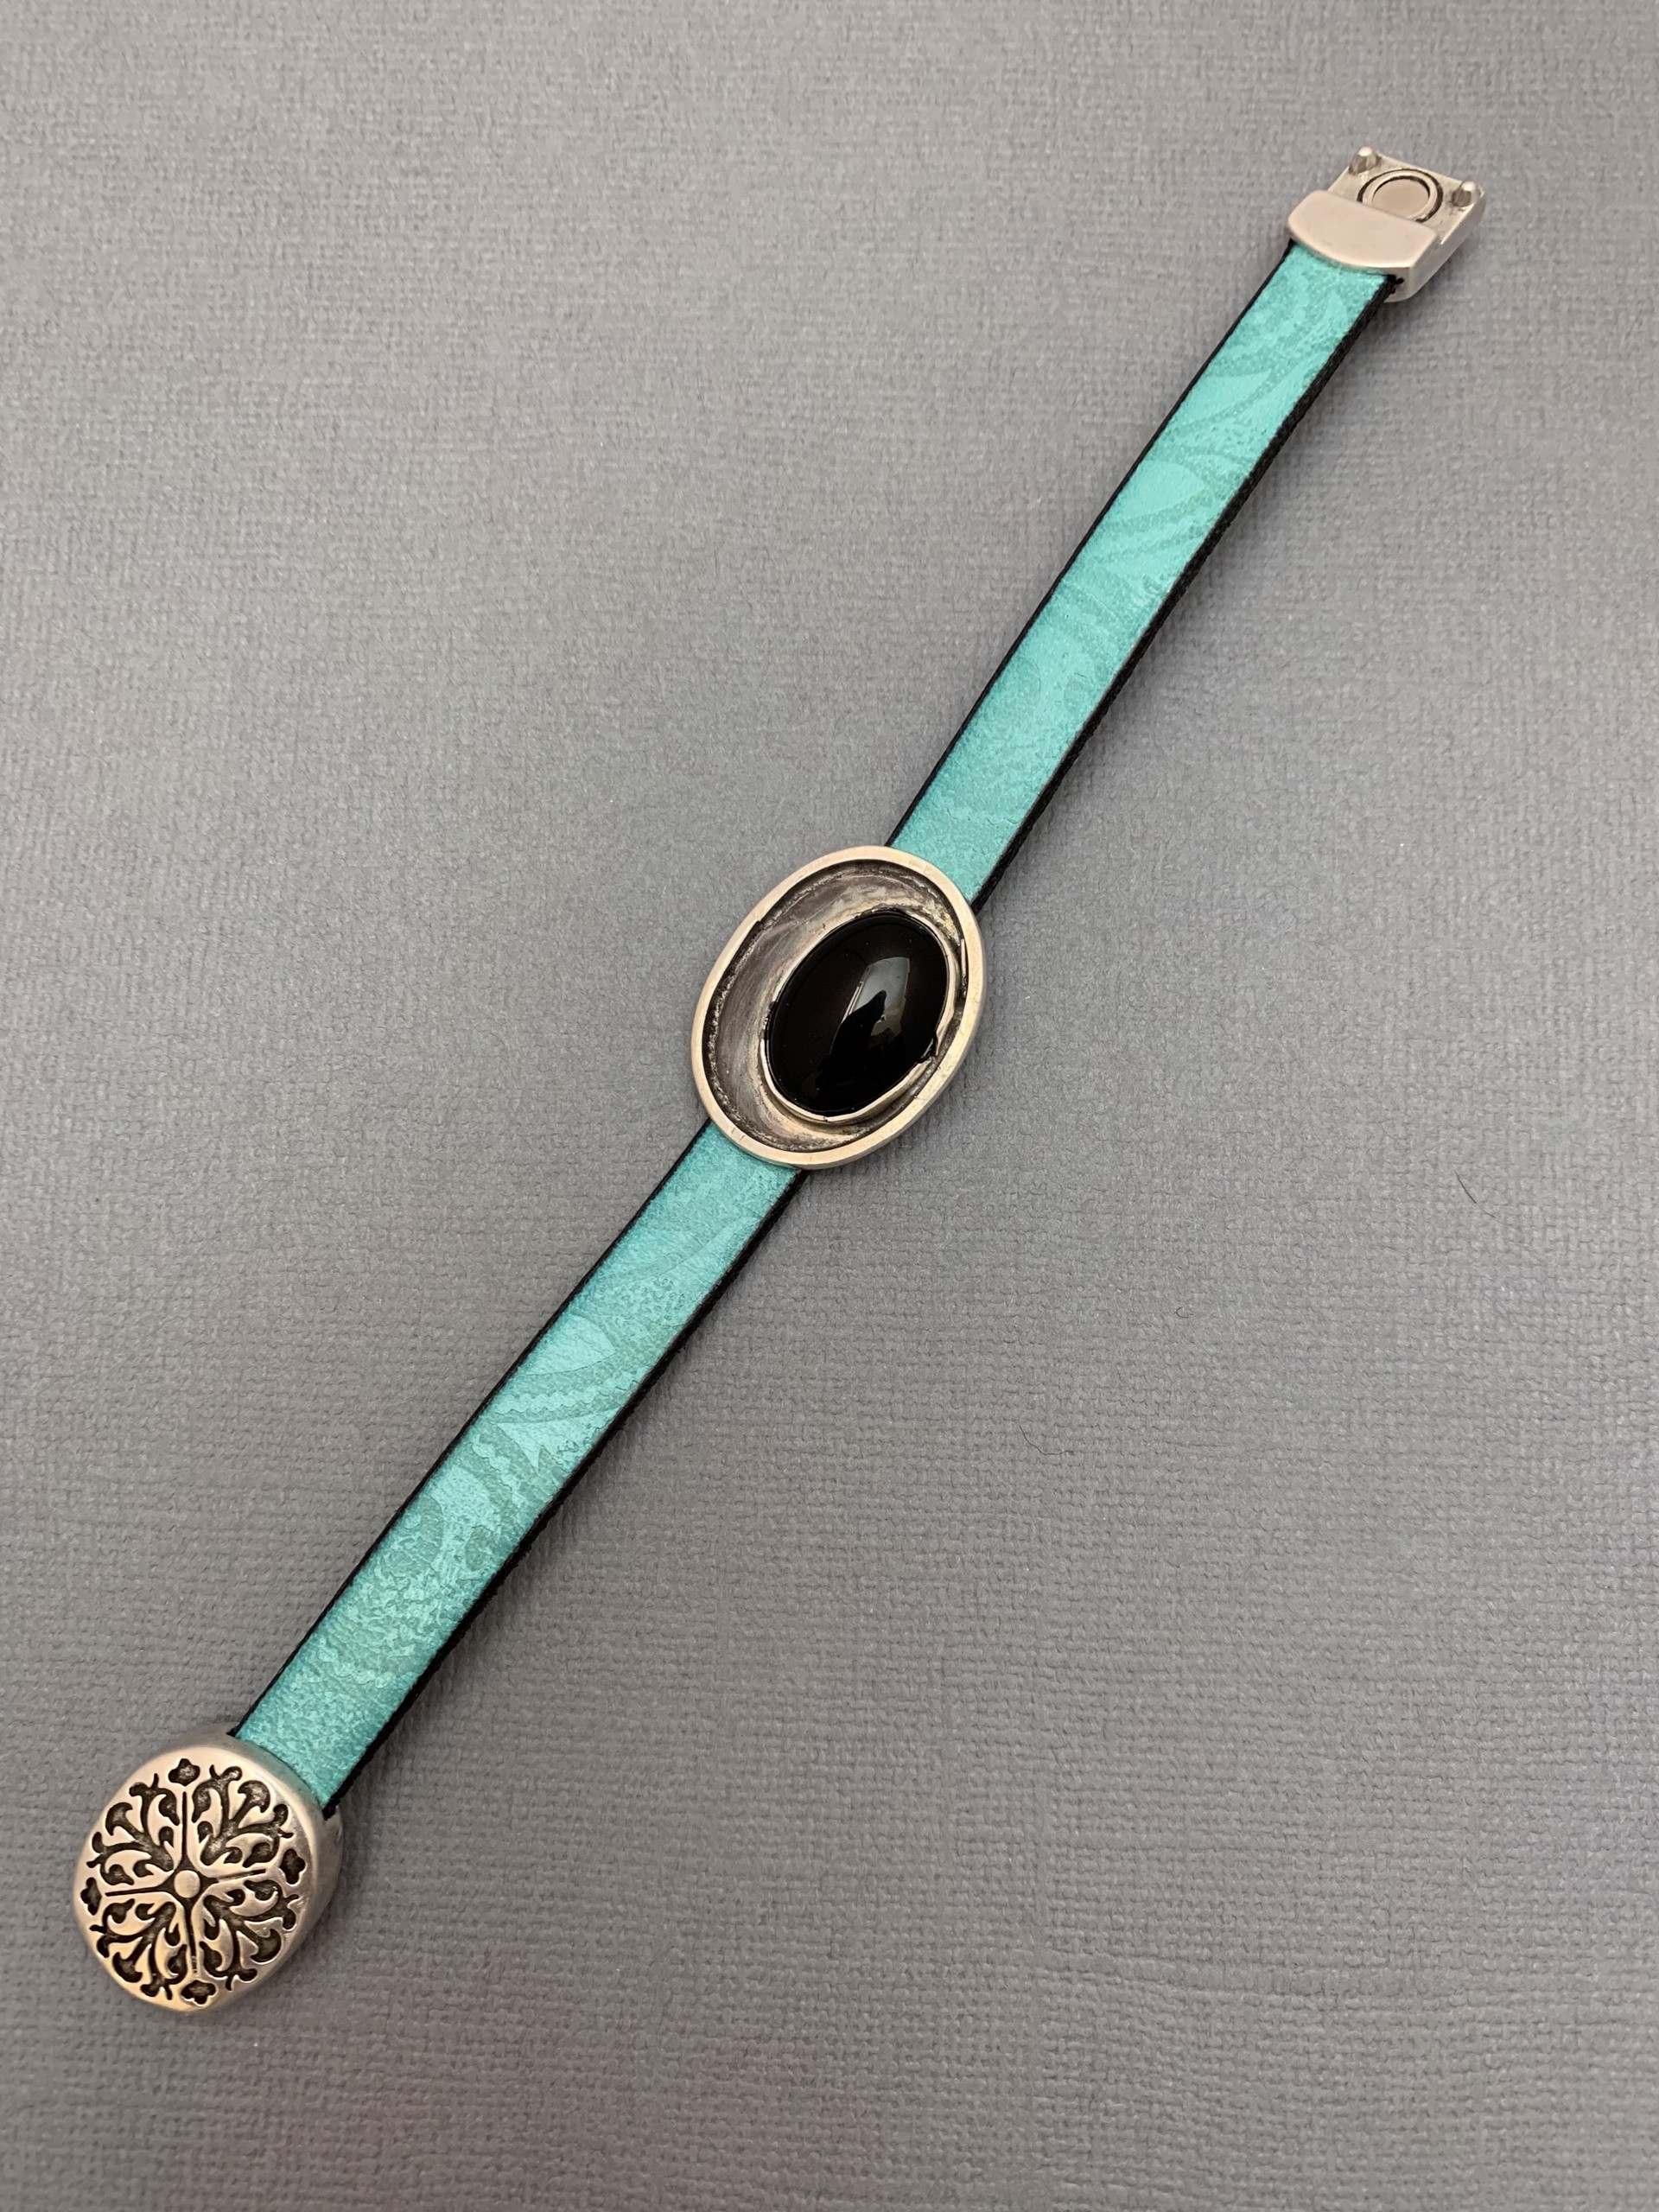 Bracelet - Turquoise Leather with Black Onyx set in Sterling Silver with Magnetic Clasp AS046 by Amy Soldin